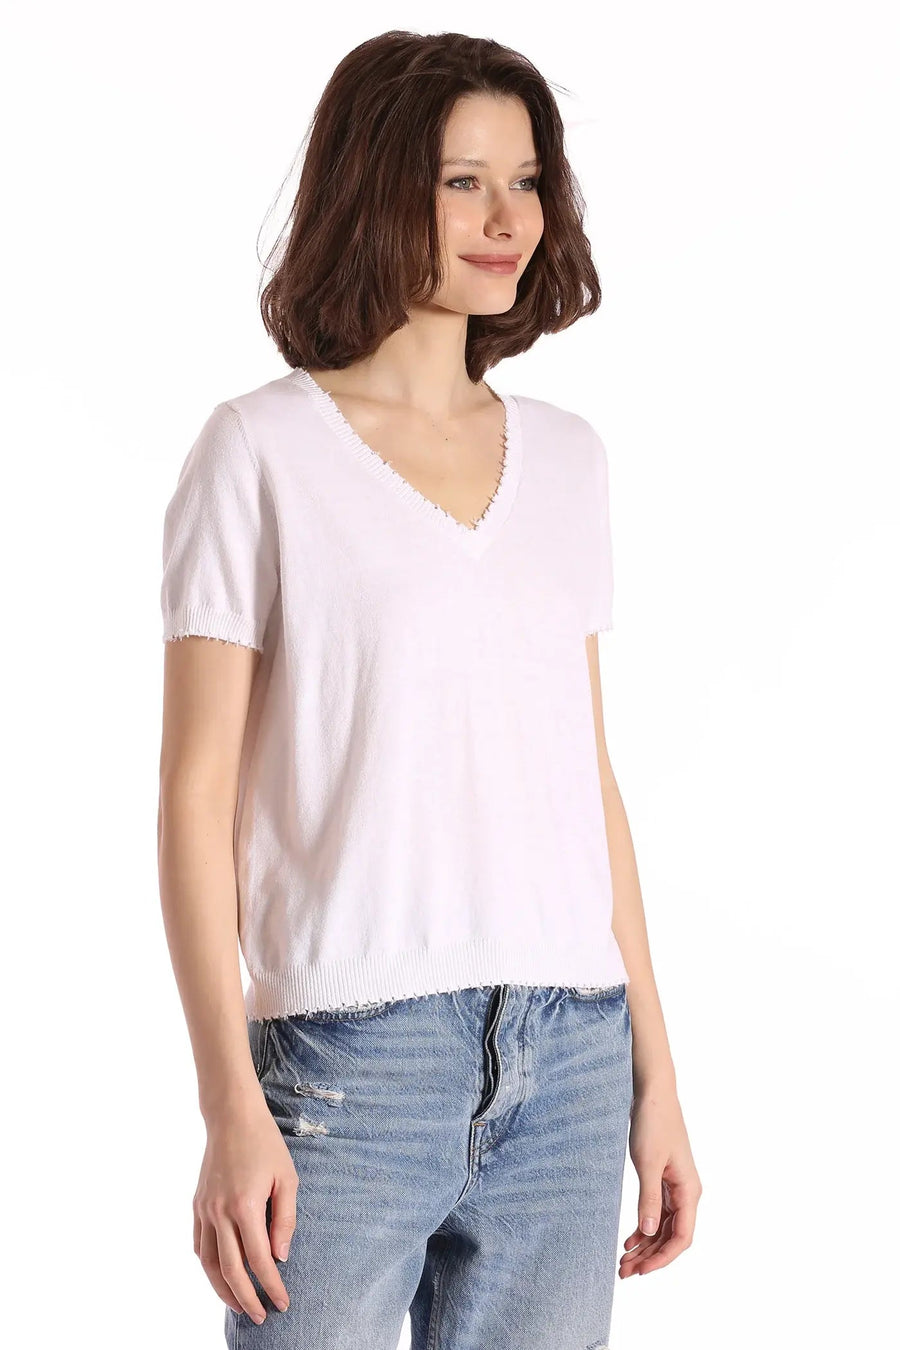 Cotton Cashmere Frayed V-Neck Tee White Top - Tees Minnie Rose 